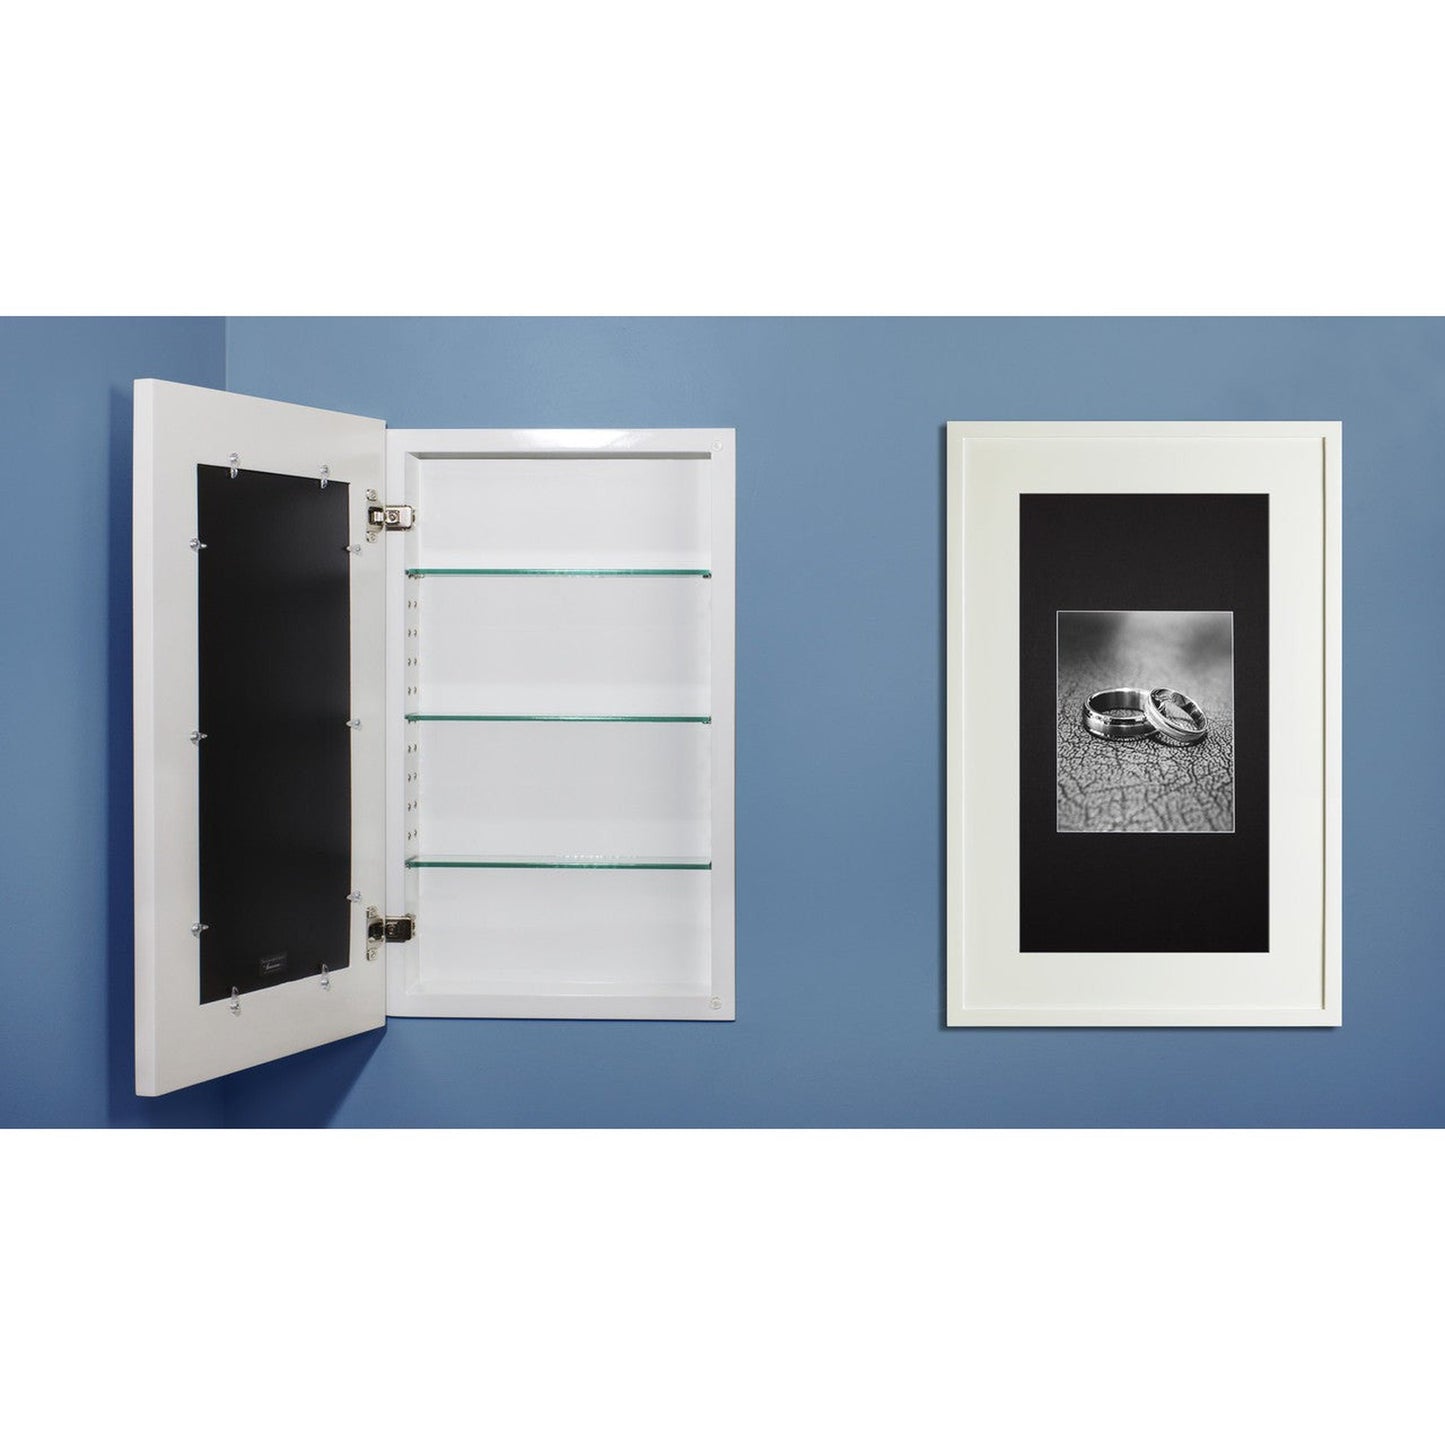 Fox Hollow Furnishings 14" x 24" White Extra Large Contemporary Standard 3.75" Depth White Interior Recessed Picture Frame Medicine Cabinet